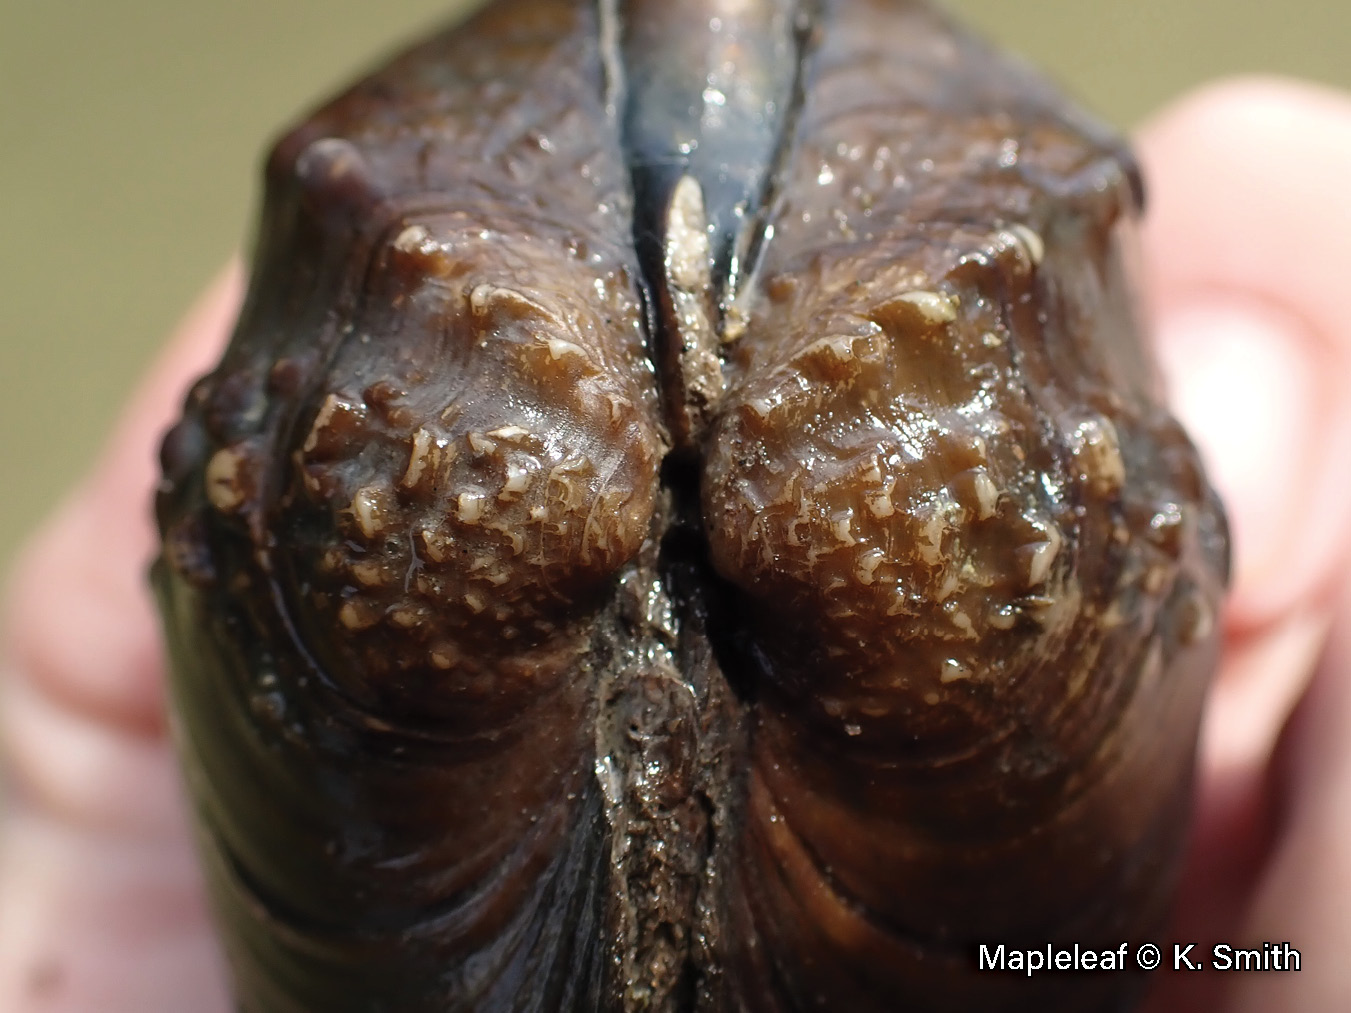 Picture of the beak of a mapleleaf mussel in a hand, an orangish-brown medium-sized mussel that has two rows of crowded nodules on its beak